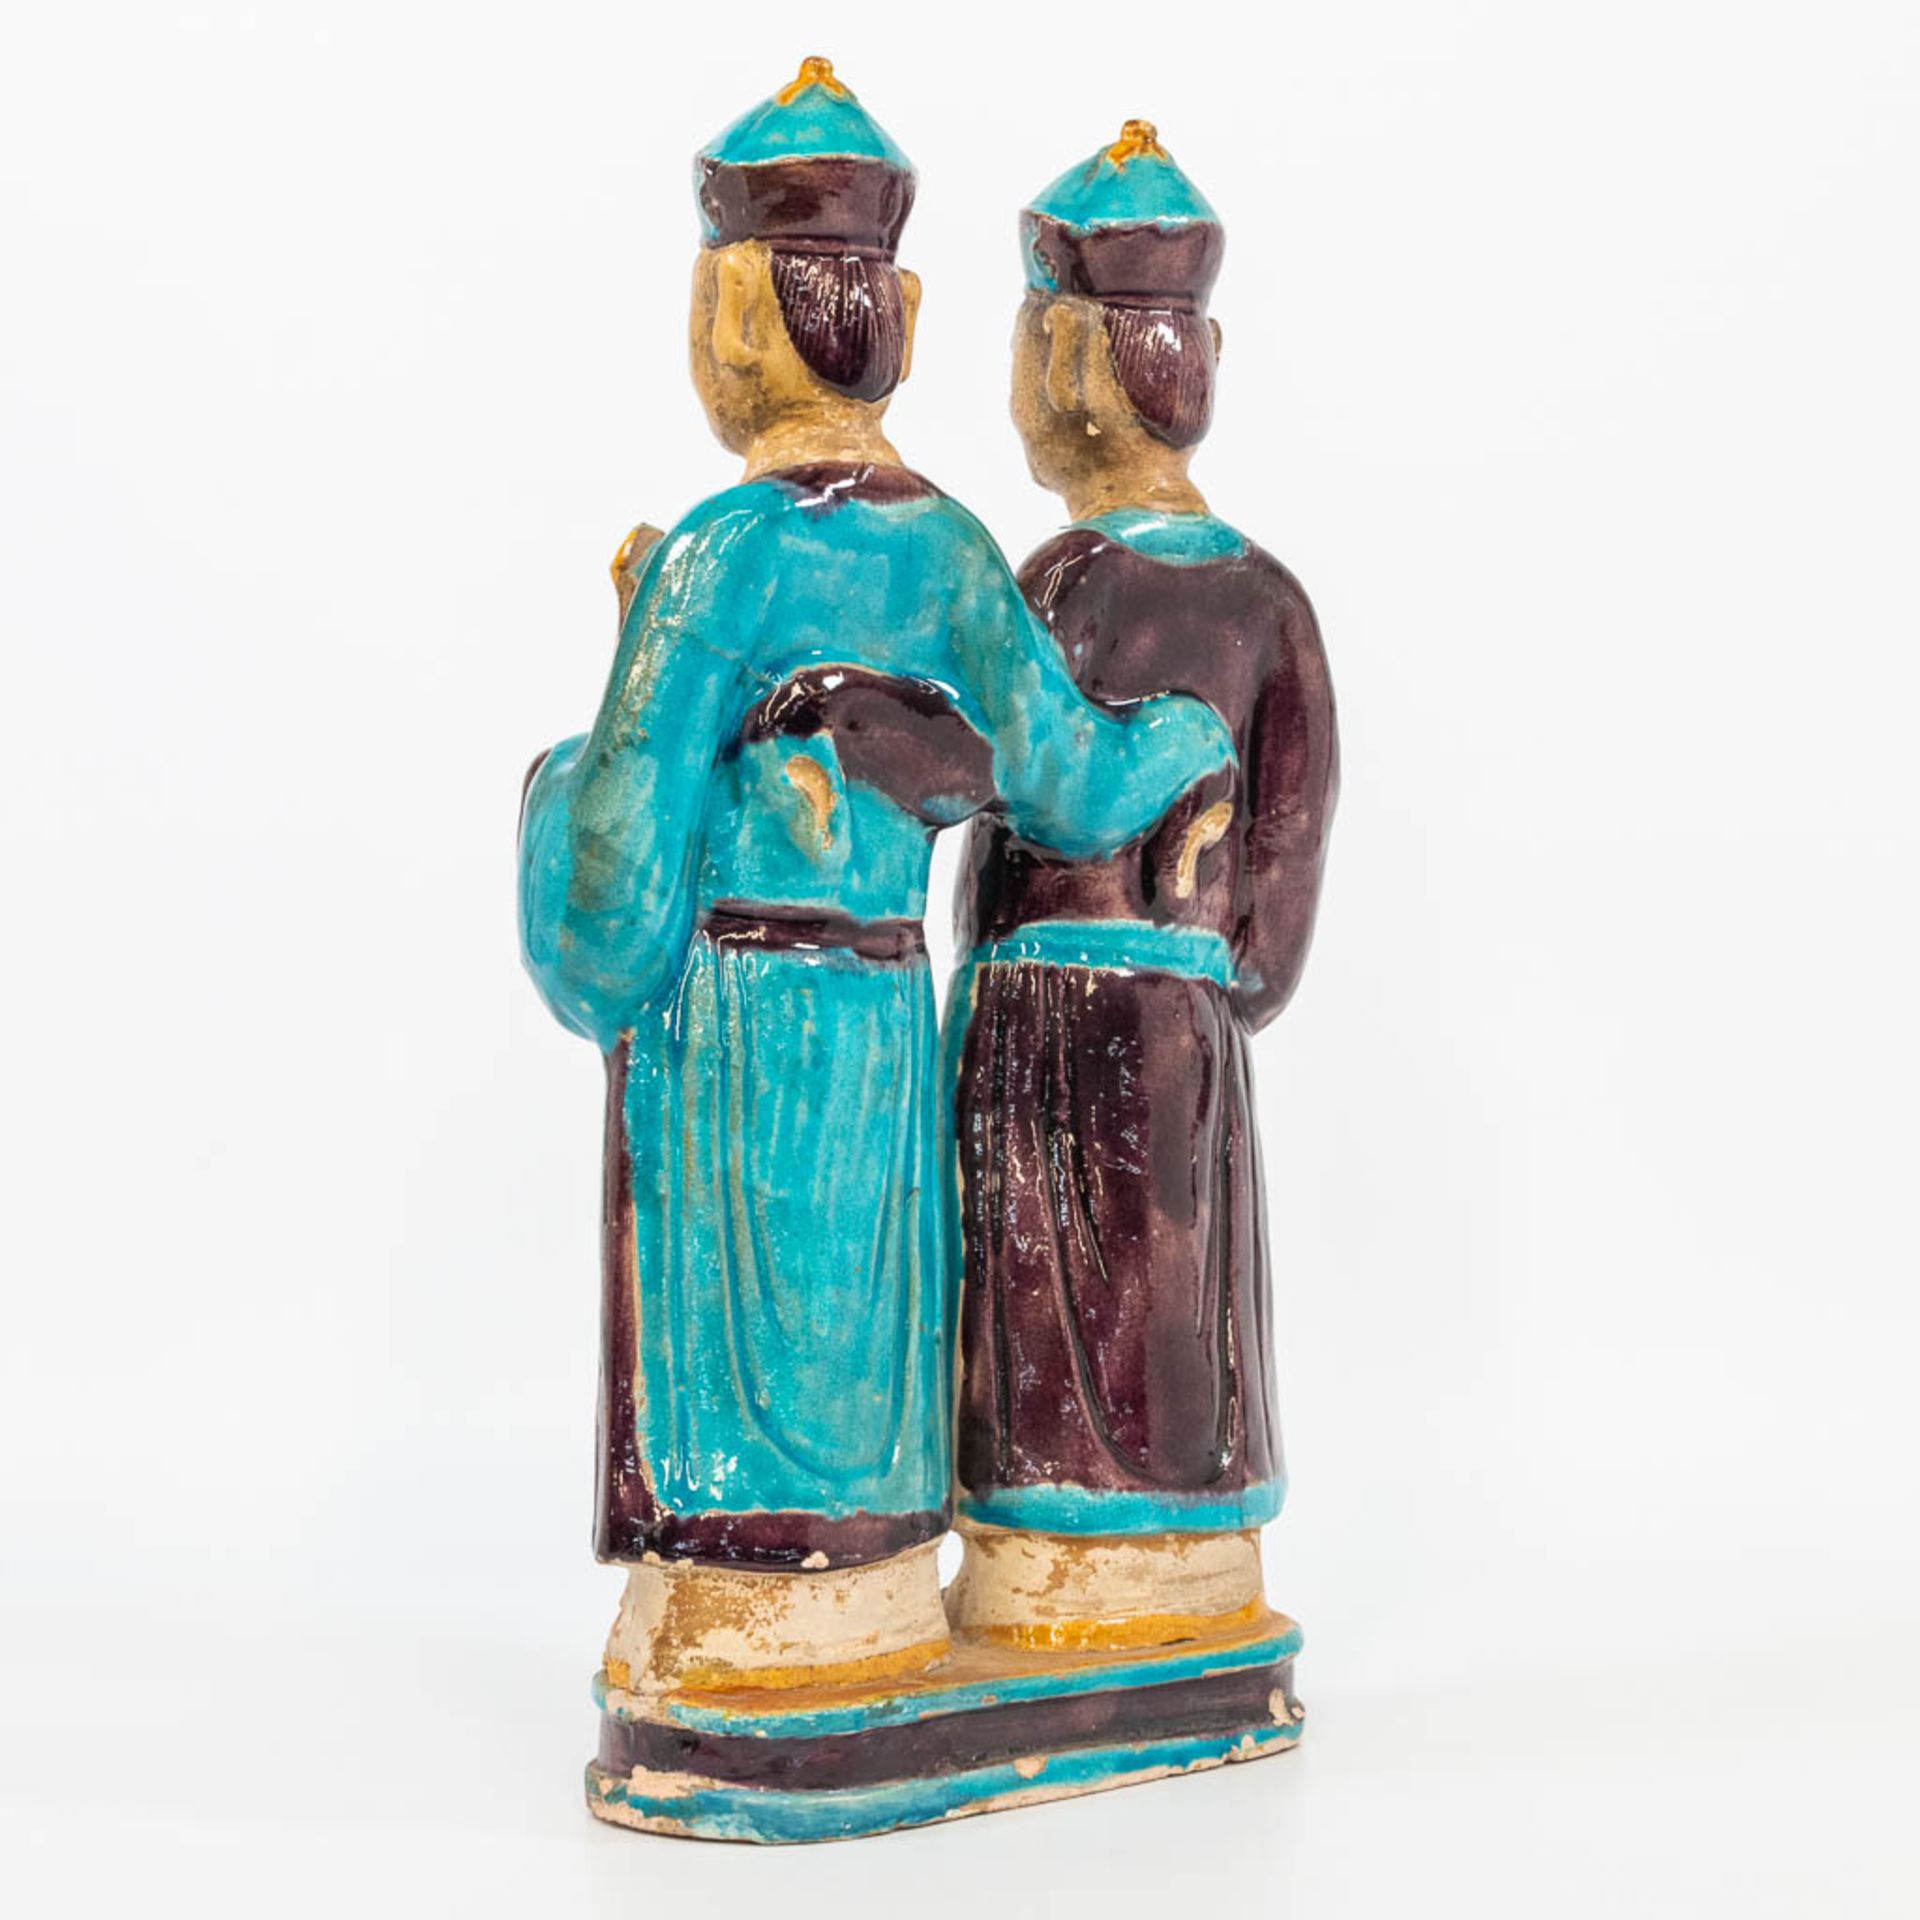 A statue made of glazed earthenware, a pair of Easern figurines. (8,5 x 24 x 41 cm) - Bild 5 aus 16